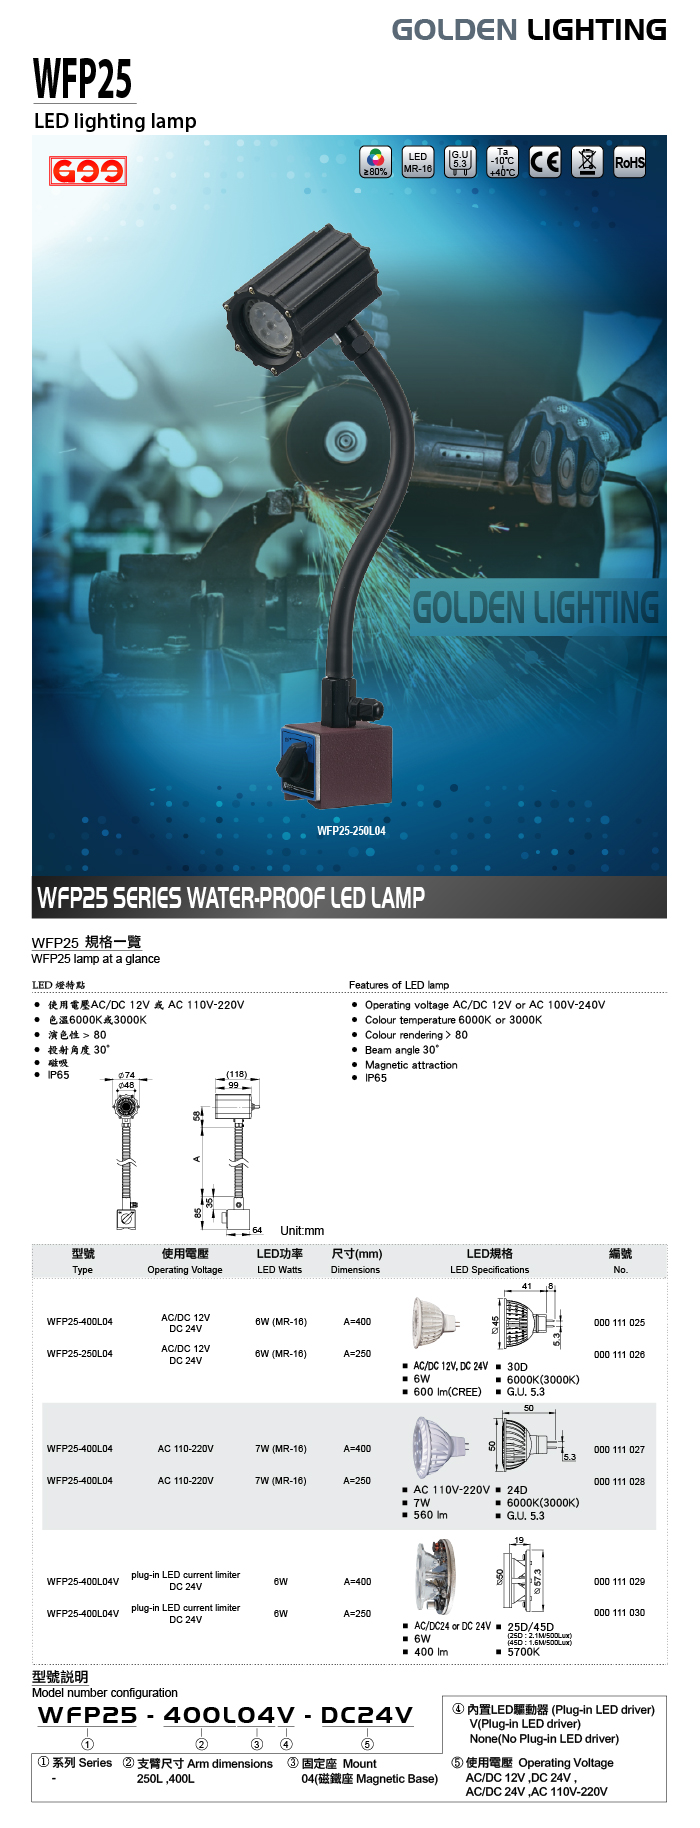 WFP25 WATER-PROOF LED LAMP